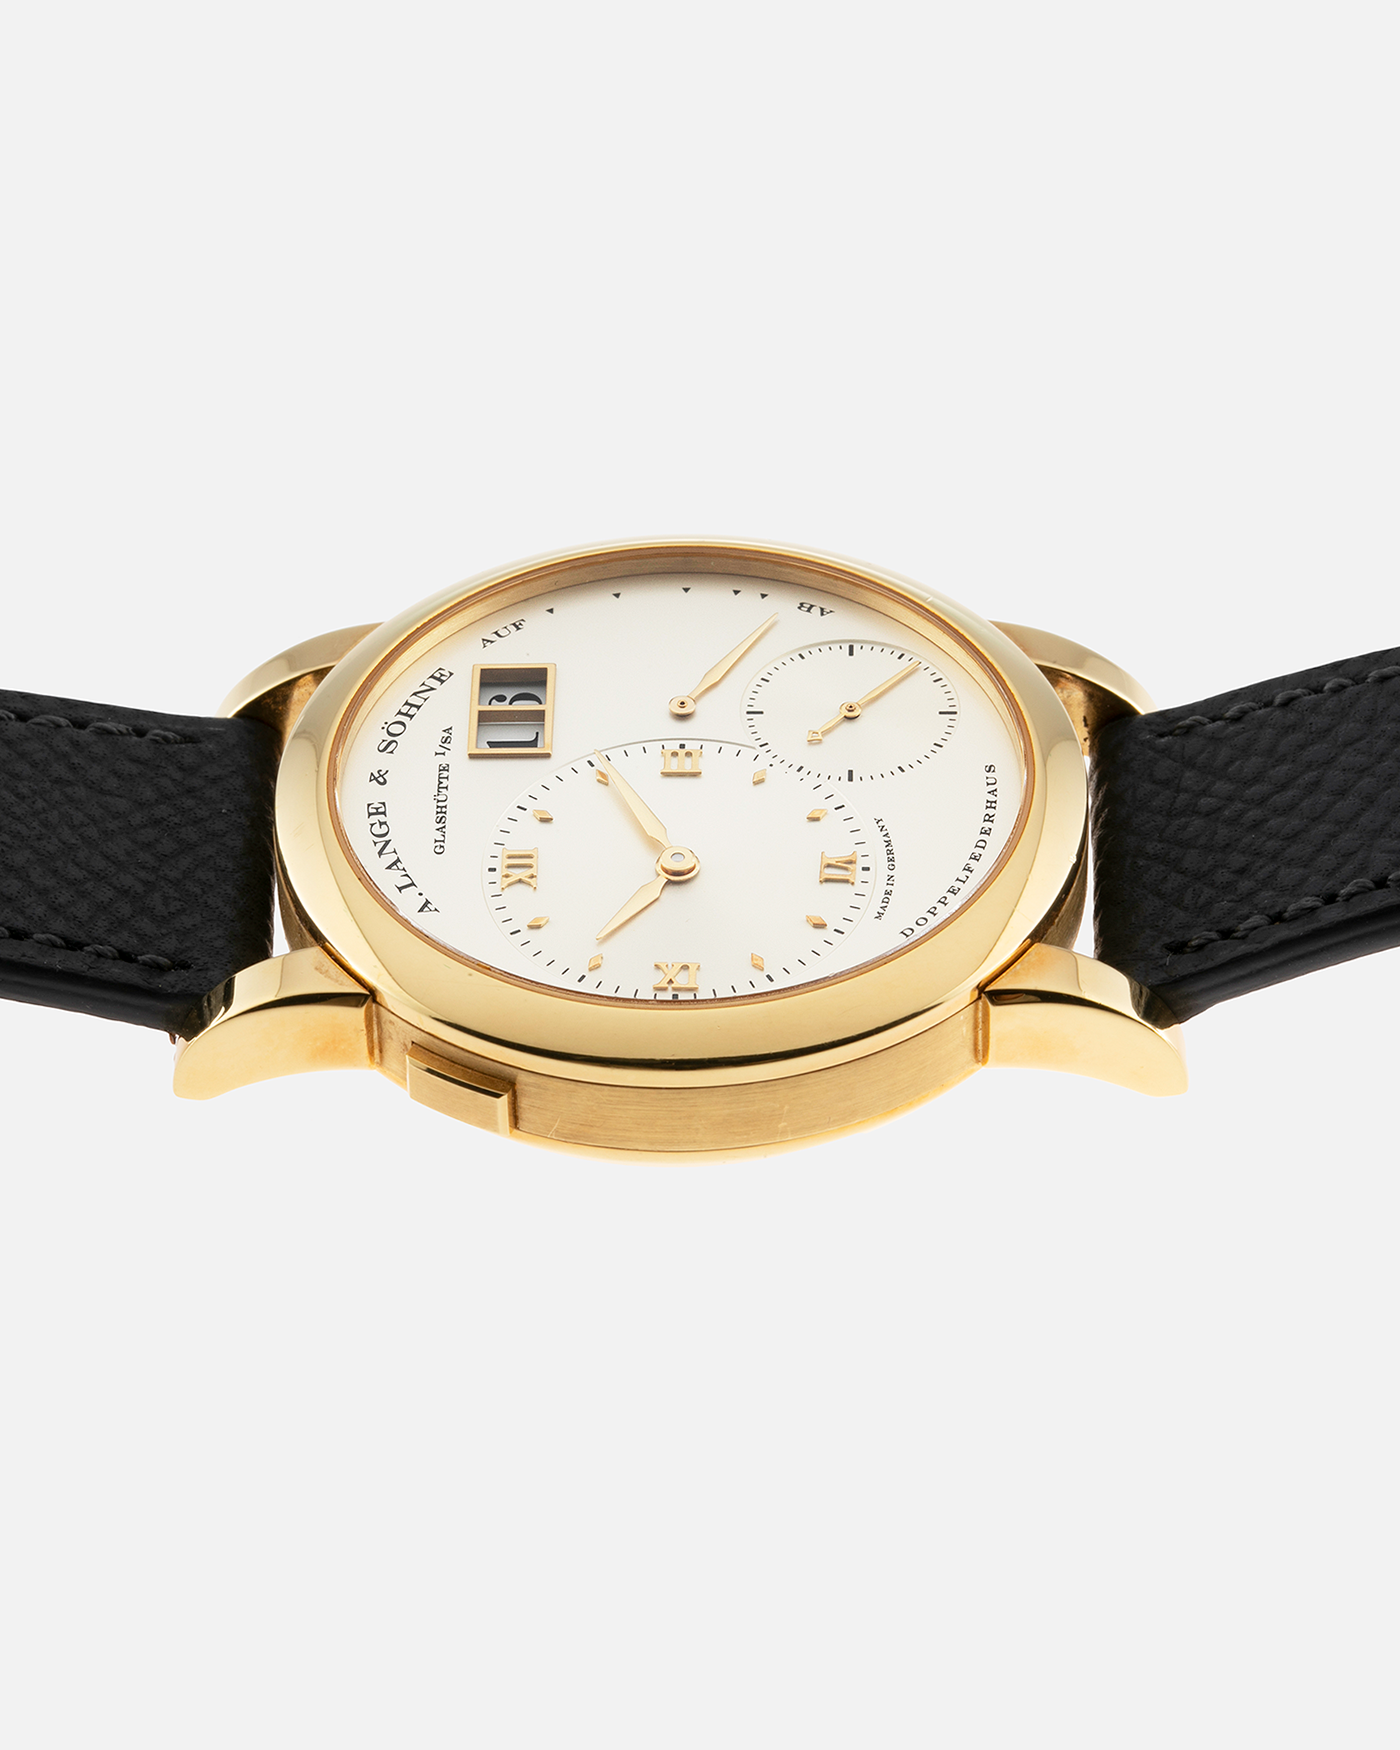 Brand: A. Lange & Söhne Year: 2000’s Model: Lange 1 Reference Number: 101.027 Material: 18-carat Yellow Gold Movement: Cal. L901.0, Manual-Winding Case Diameter: 38.5mm Bracelet/Strap: Molequin Anthracite Textured Calf Strap and A. Lange & Sohne Black Alligator Strap with 18k Yellow Gold Tang Buckle